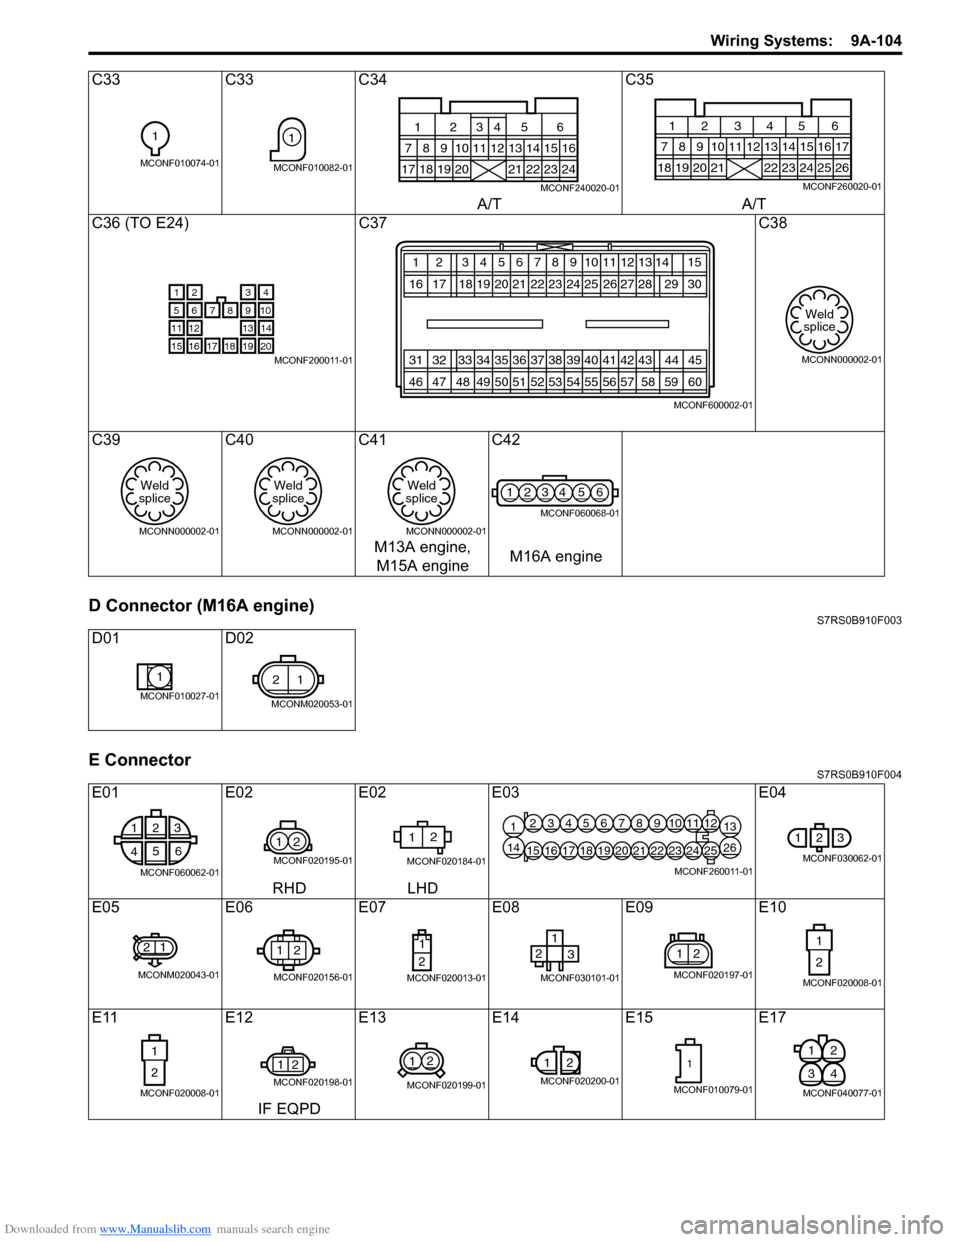 SUZUKI SWIFT 2008 2.G Service User Guide Downloaded from www.Manualslib.com manuals search engine Wiring Systems:  9A-104
D Connector (M16A engine)S7RS0B910F003
E ConnectorS7RS0B910F004
C33C33C34 C35
A/T A/T
C36 (TO E24) C37 C38
C39 C40C41 C